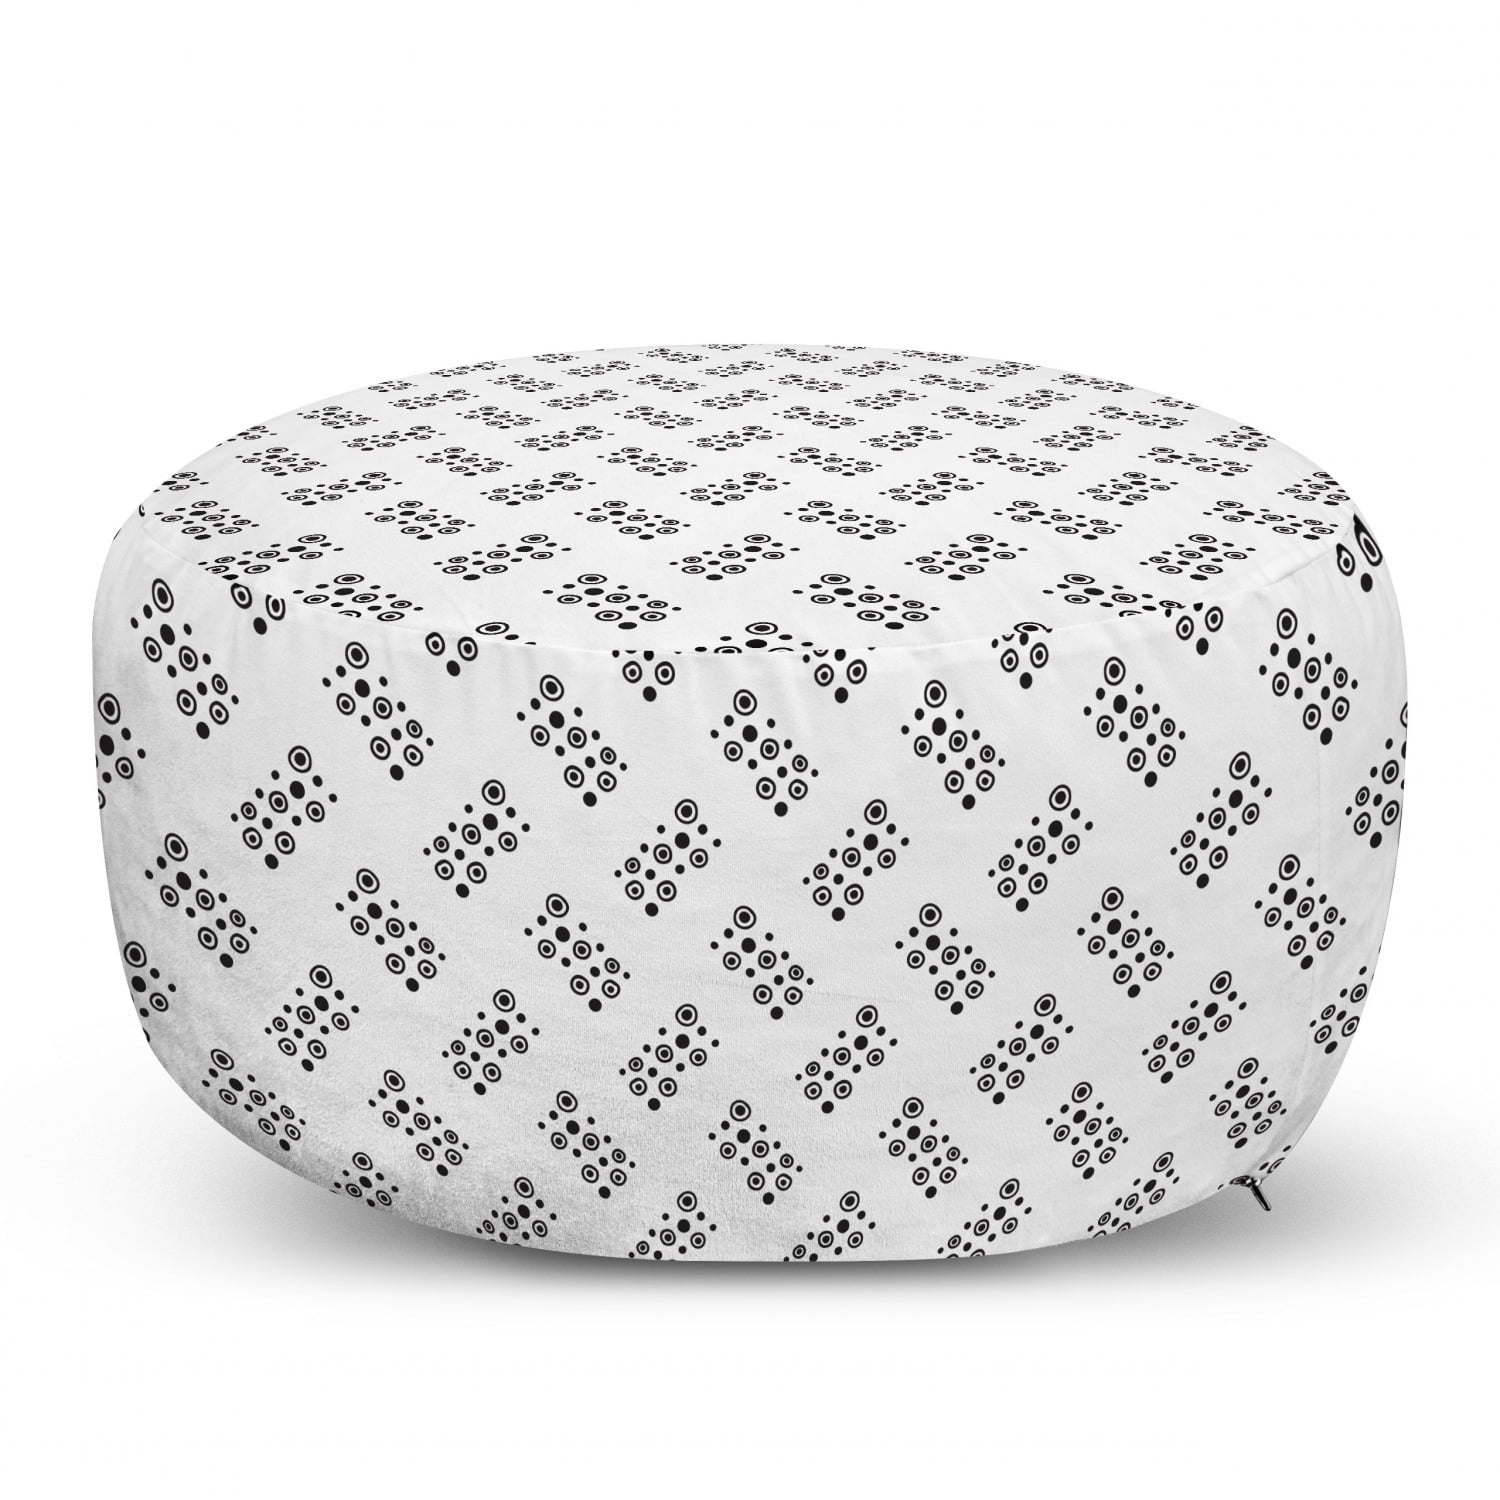 Decorative Soft Foot Rest with Removable Cover Living Room and Bedroom Charcoal Grey White Ambesonne Abstract Ottoman Pouf Boho Style Tribal Geometric Squares and Circles Triangles Contemporary